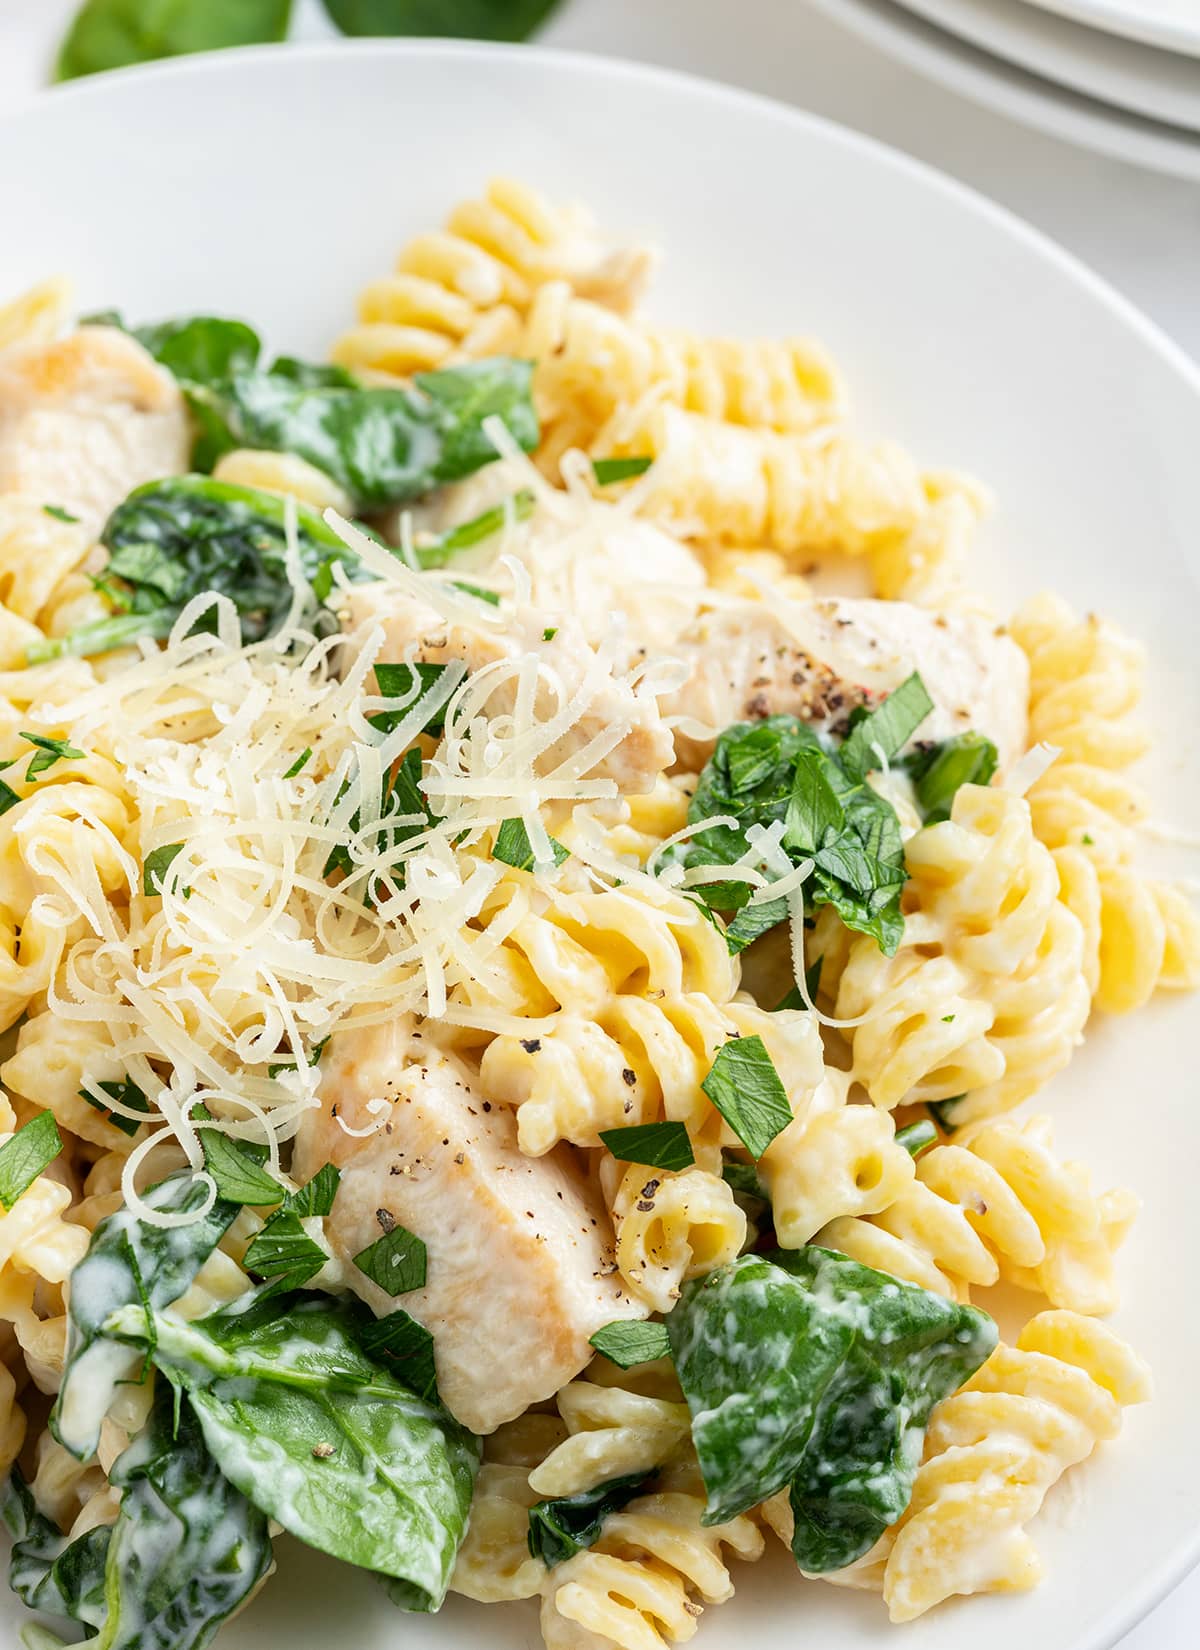 A plateful of creamy lemon chicken pasta with spinach, topped with freshly grated parmesan cheese.